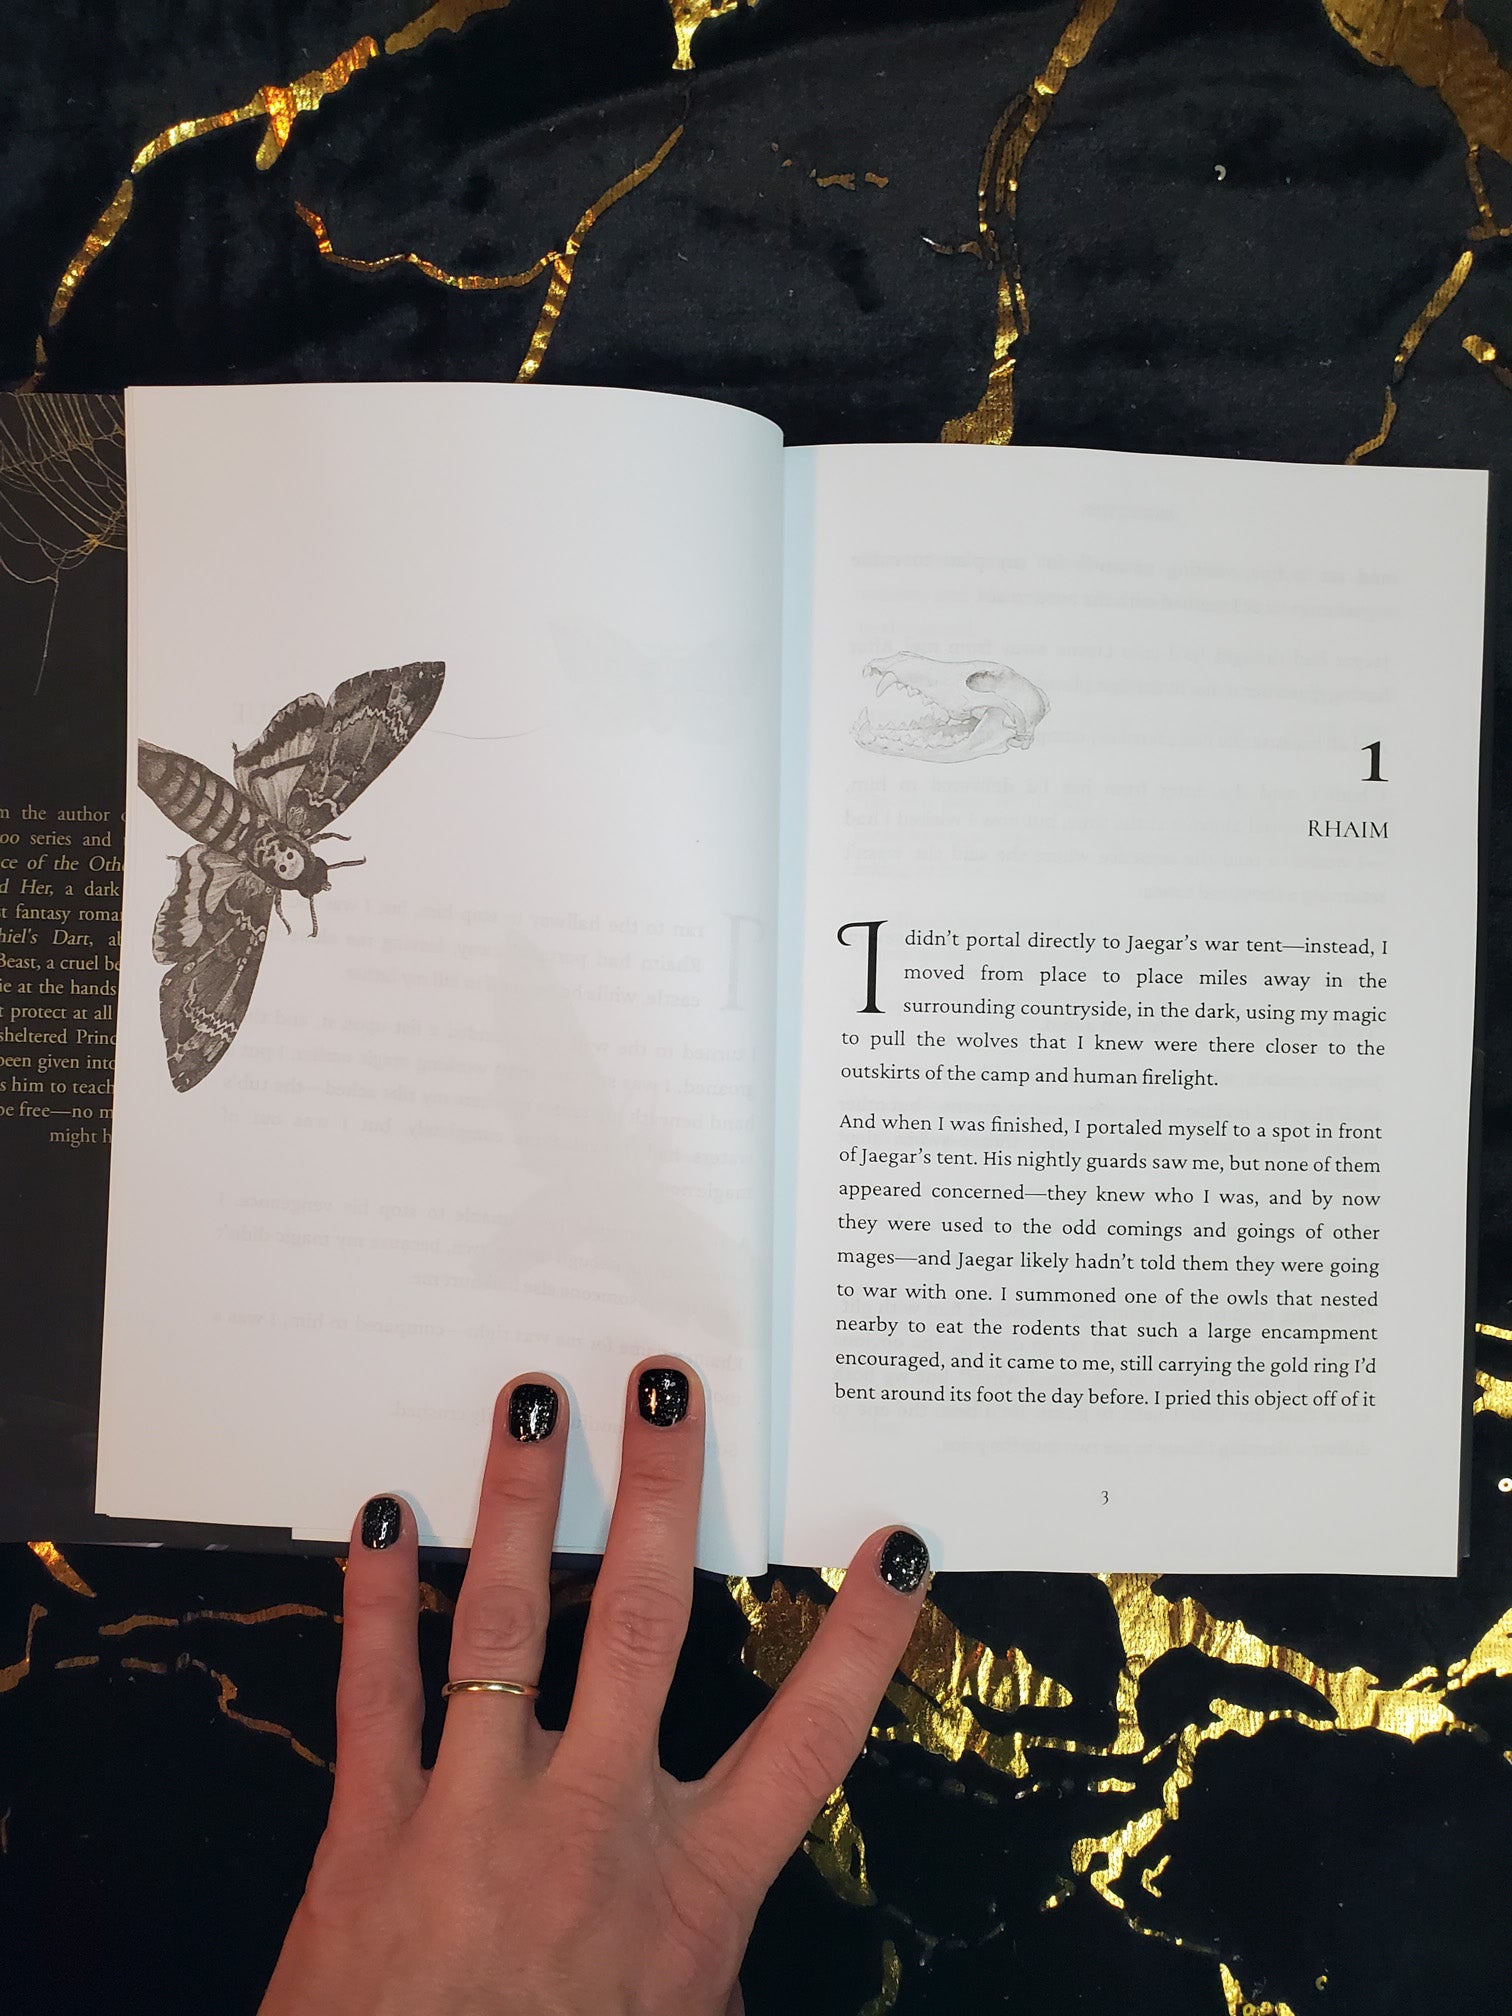 Photo of Chapter one spread for Break Her by Cassie Alexander. Left is a moth, right shows chapter one with an animal skull illustration. Book is sitting on a black and gold background.